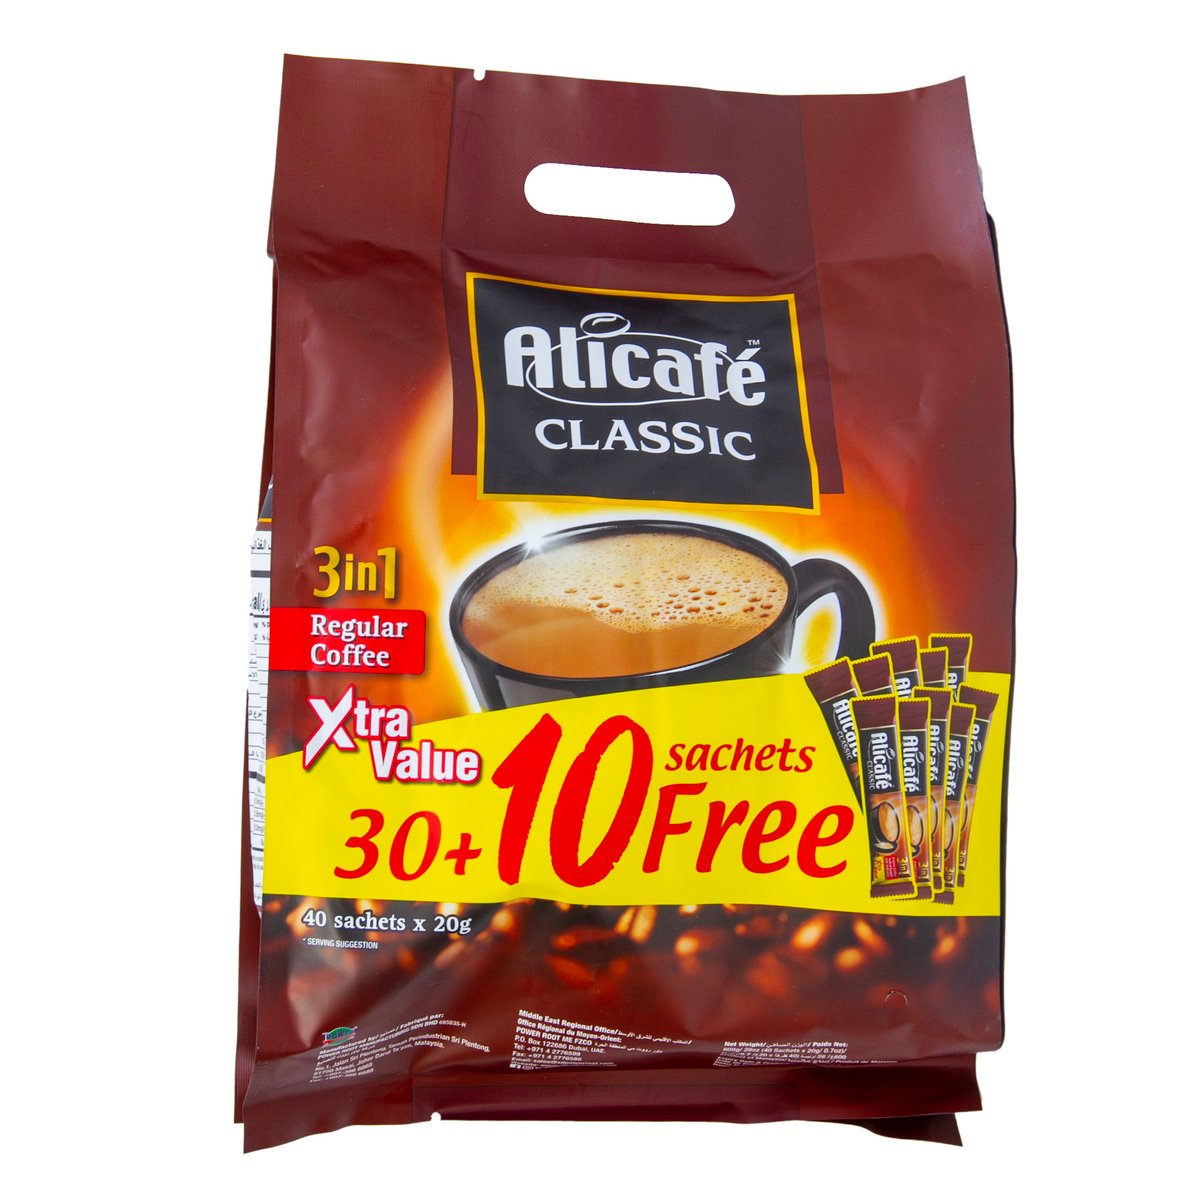 Alicafe Classic 3in1 Coffee 20 g 30+10